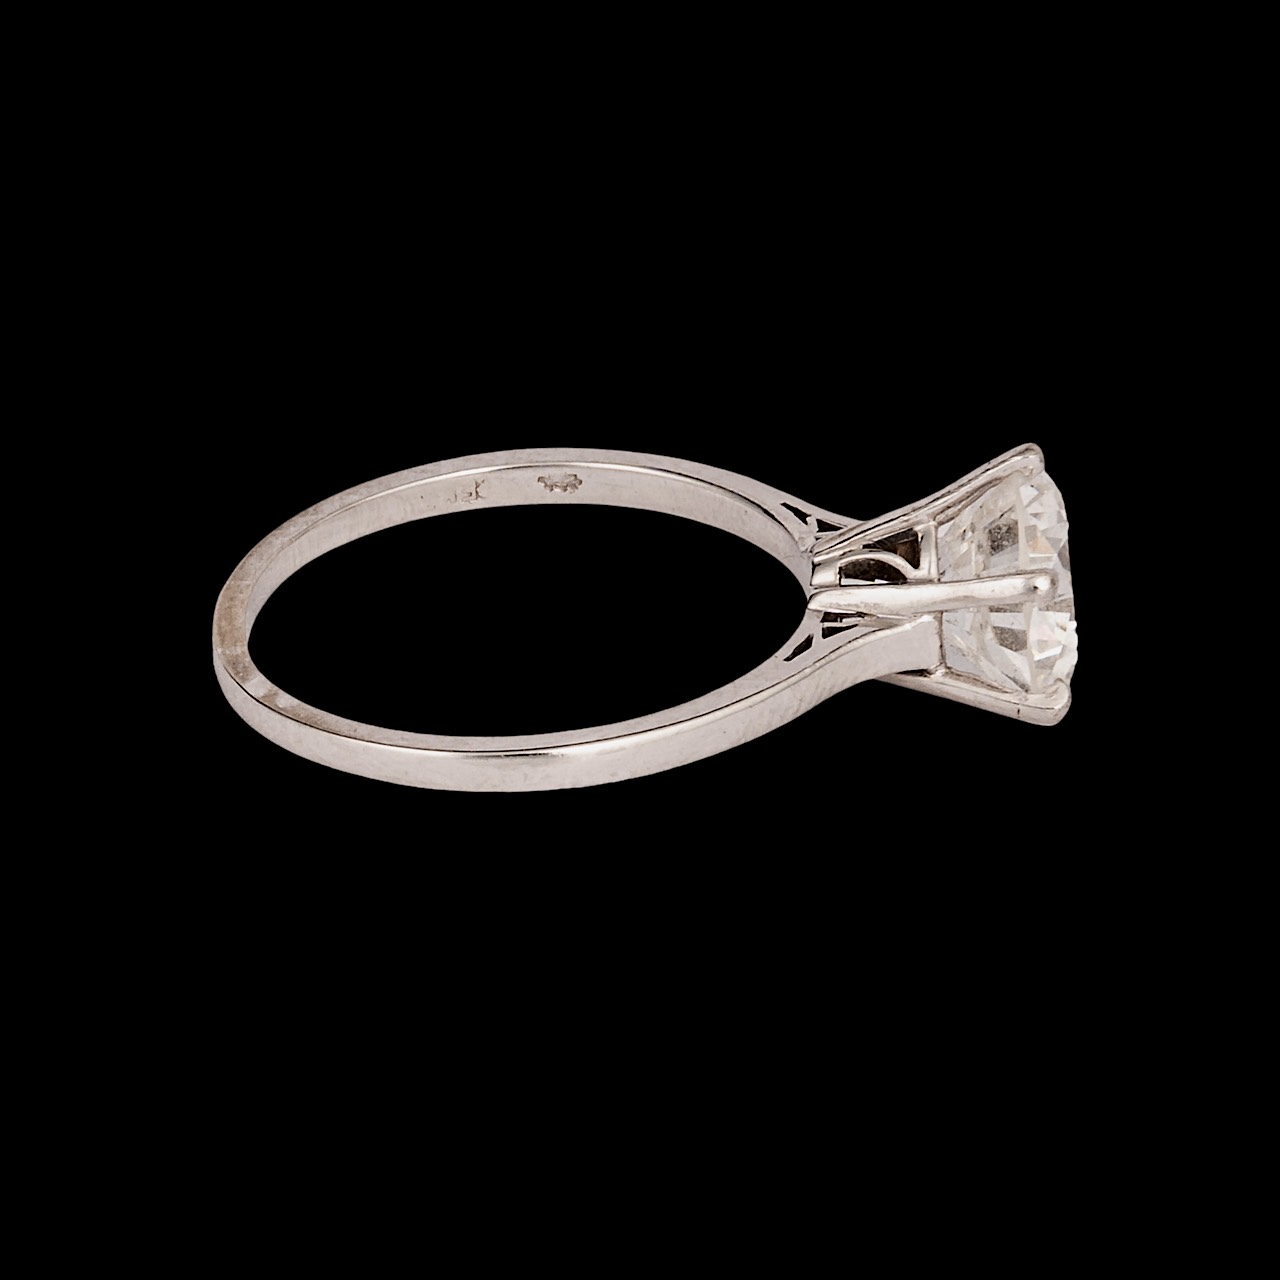 A fine 18ct white gold solitaire ring set with a 2,74 ct brilliant cut diamond - Image 5 of 5